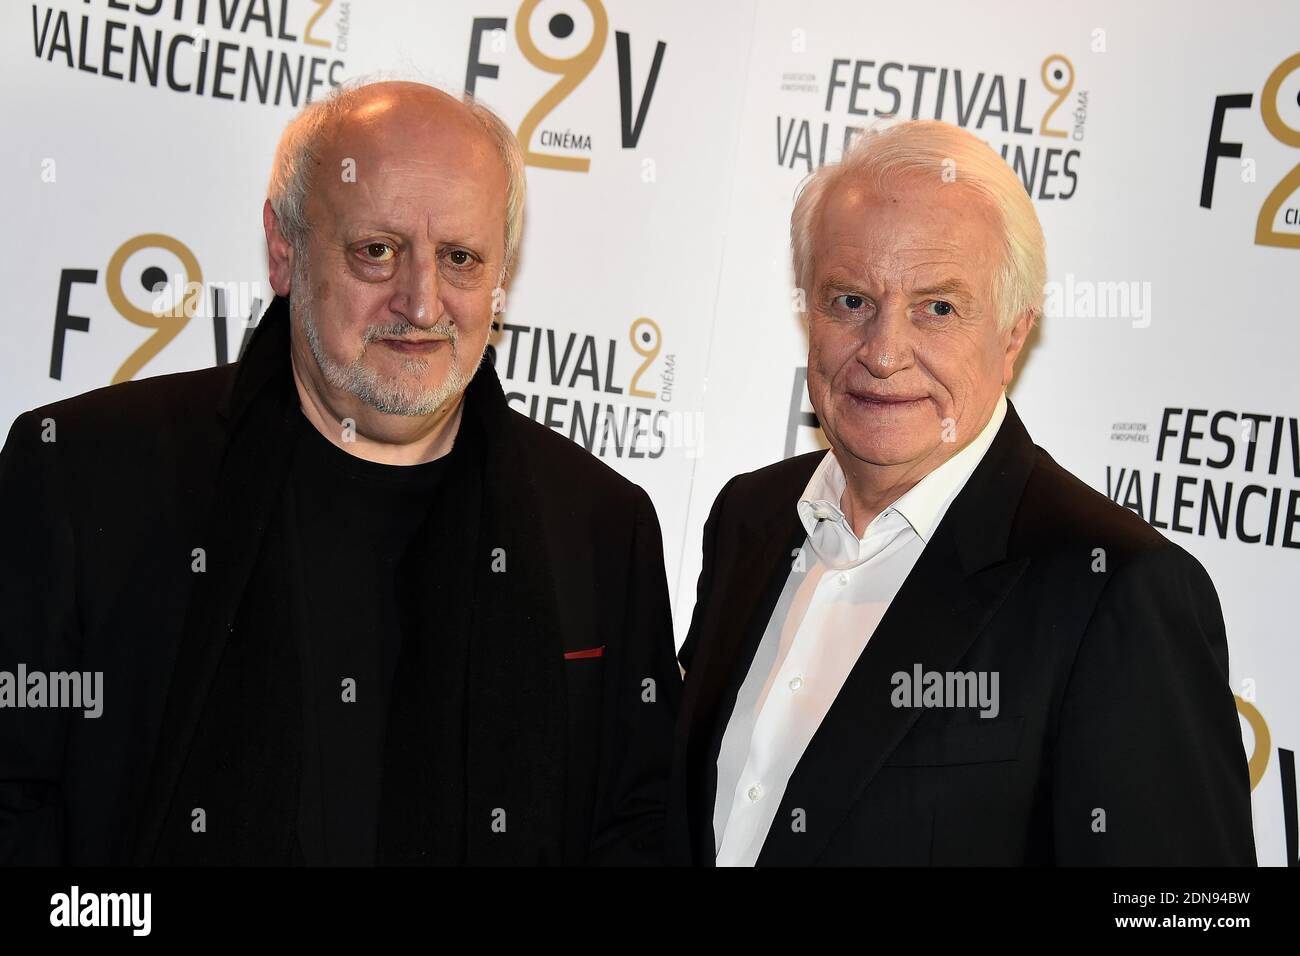 Jacques Bral and Andre Dussollier at the Festival 2 Valenciennes closing ceremony, France, on March 28, 2015. Photo by Nicolas Briquet/ABACAPRESS.COM Stock Photo